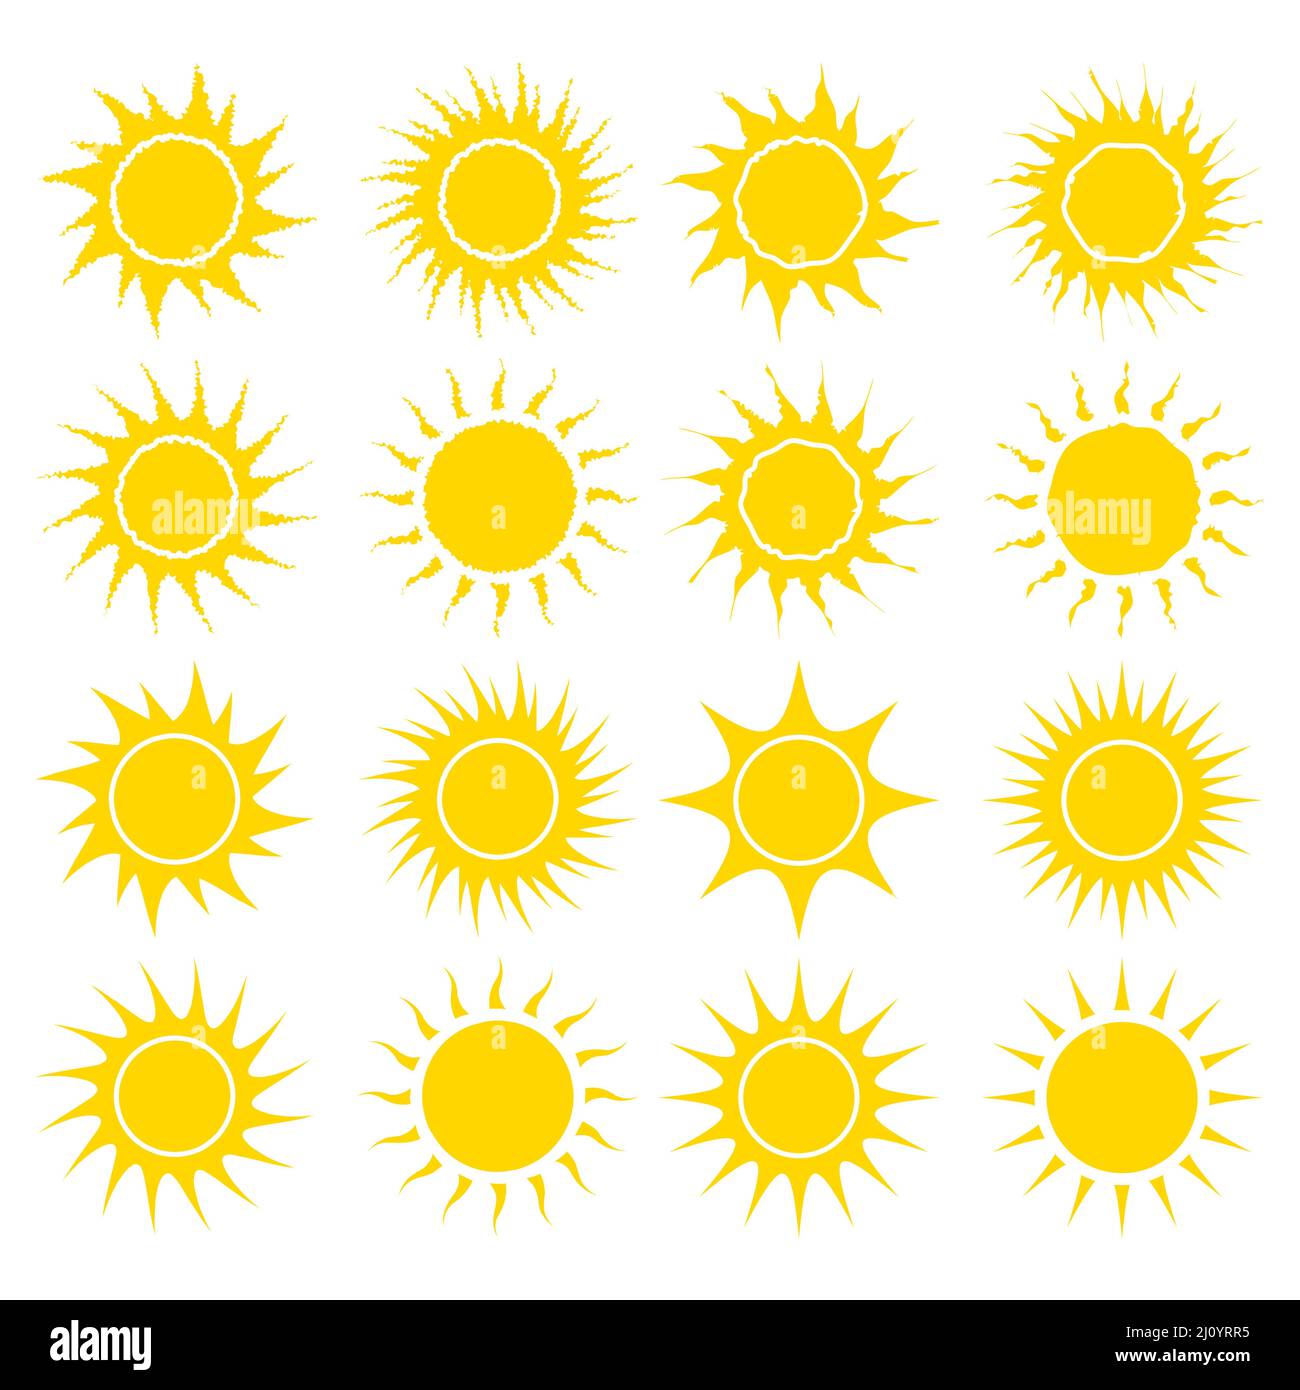 Sun yellow symbol collection. Vector illustration isolated on white background Stock Vector